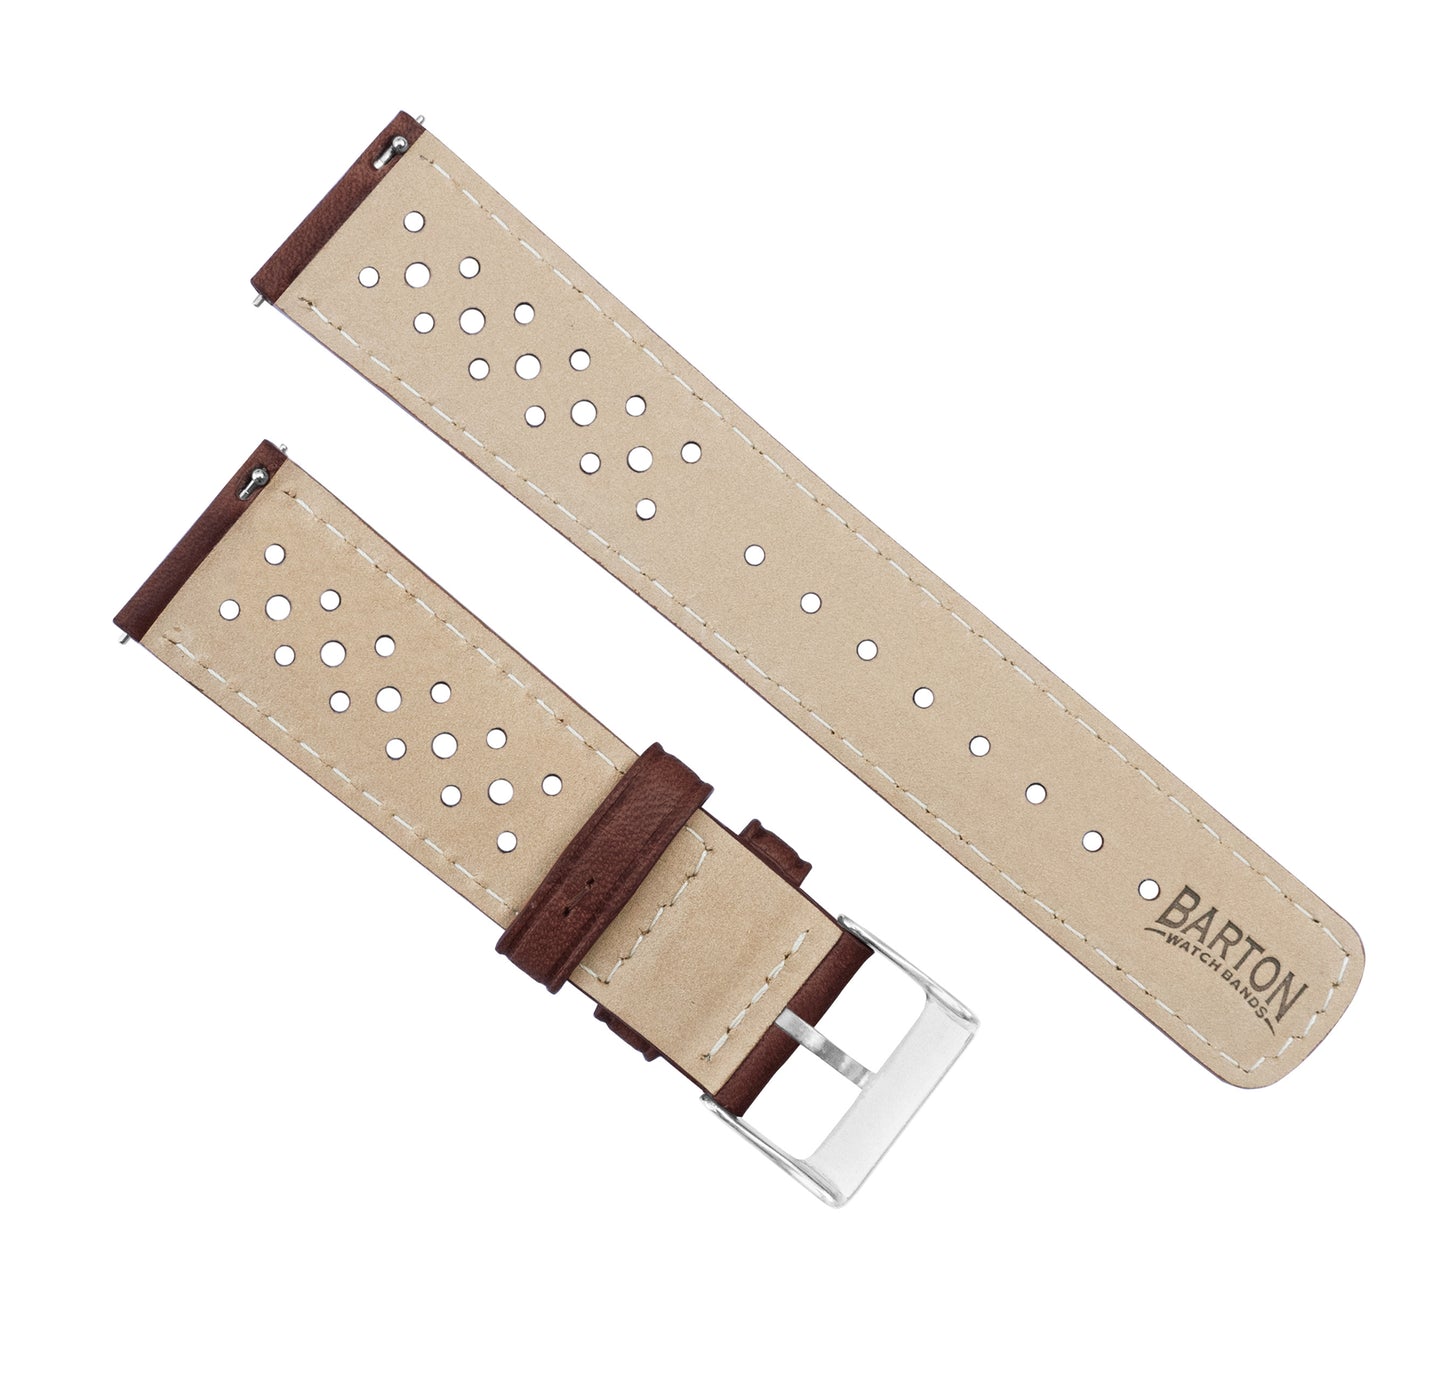 Fossil Gen 5 | Racing Horween Leather | Chocolate Brown - Barton Watch Bands